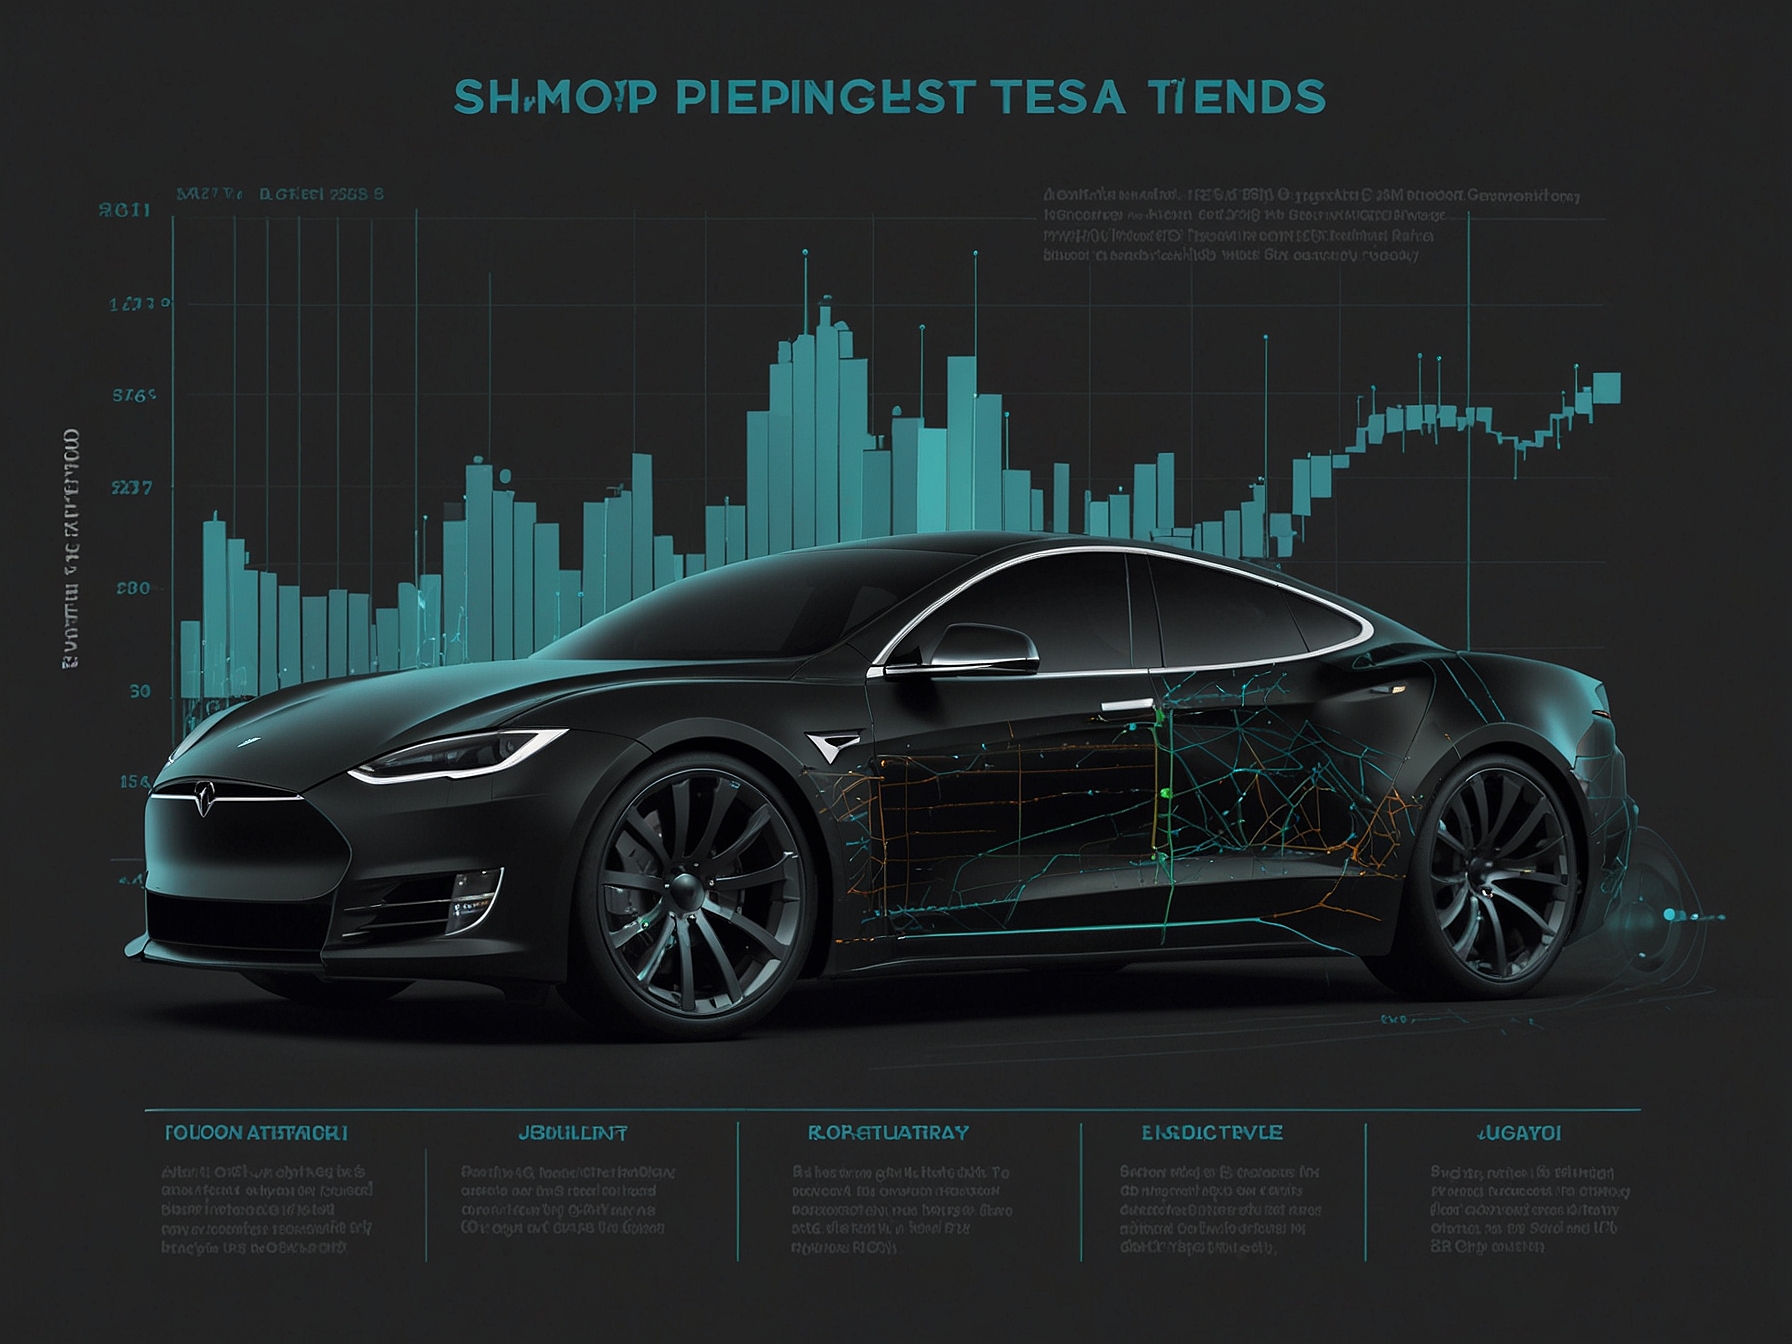 A graph showing stock performance trends for Tesla, AMD, and Shopify, indicating their growth trajectories compared to Nvidia, with each company highlighting its sector—from electric vehicles to high-performance computing to e-commerce.